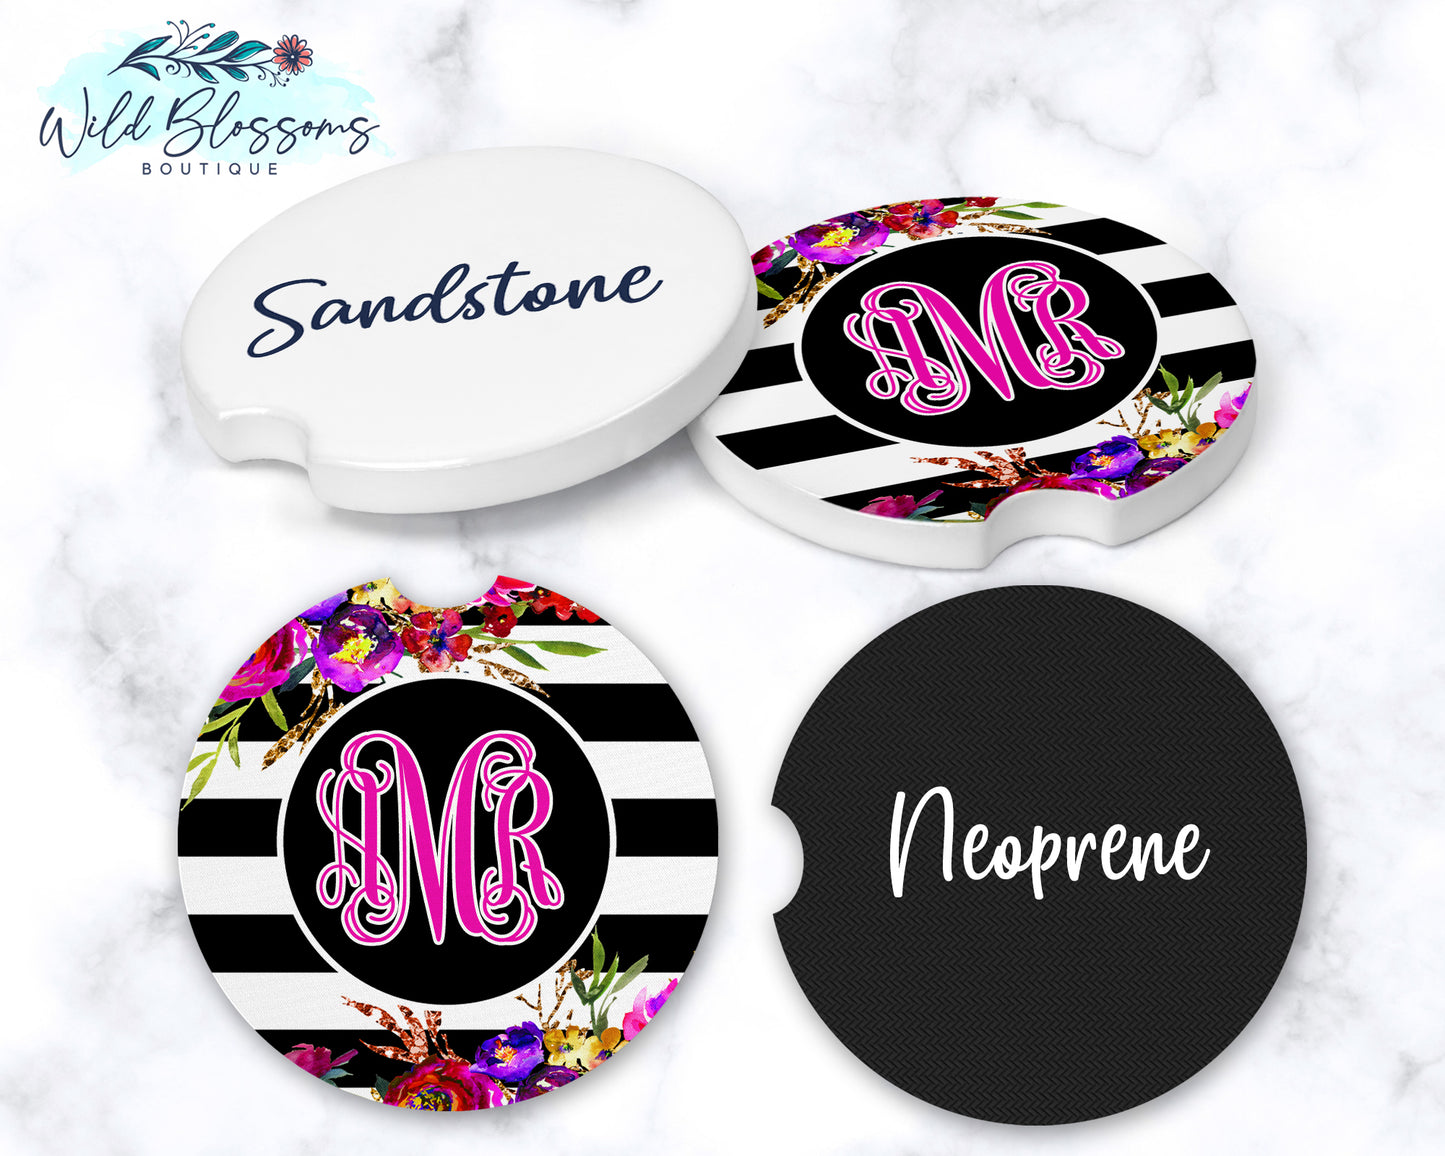 Black And White Striped Bright Floral Car Coasters